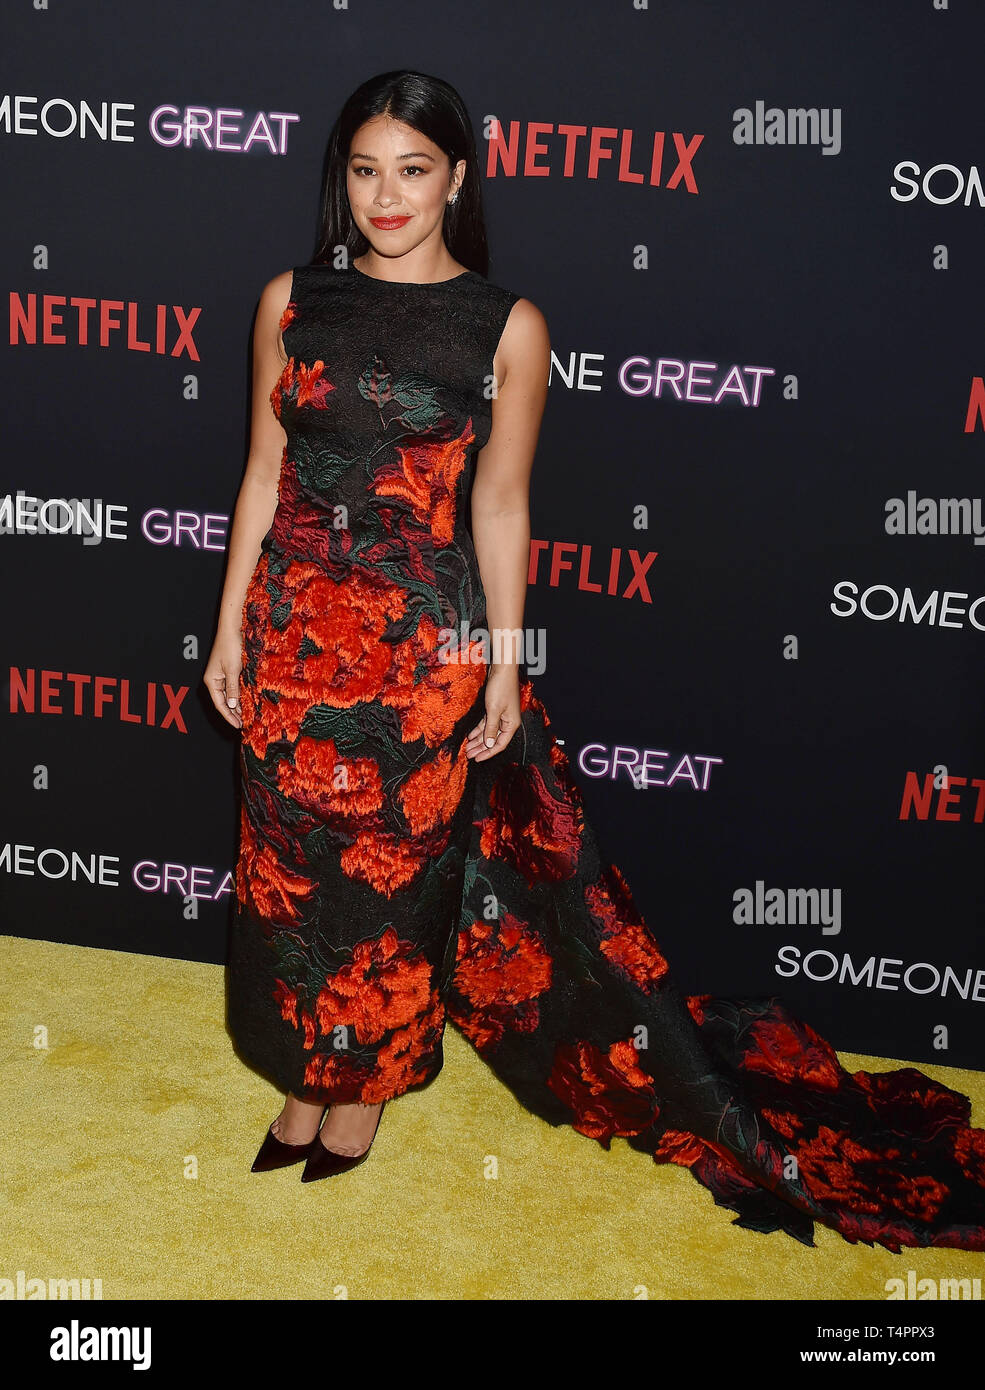 HOLLYWOOD, CA - APRIL 17: Gina Rodriguez attends the Los Angeles special screening of Netflix's 'Someone Great' at ArcLight Hollywood on April 17, 2019 in Hollywood, California. Stock Photo